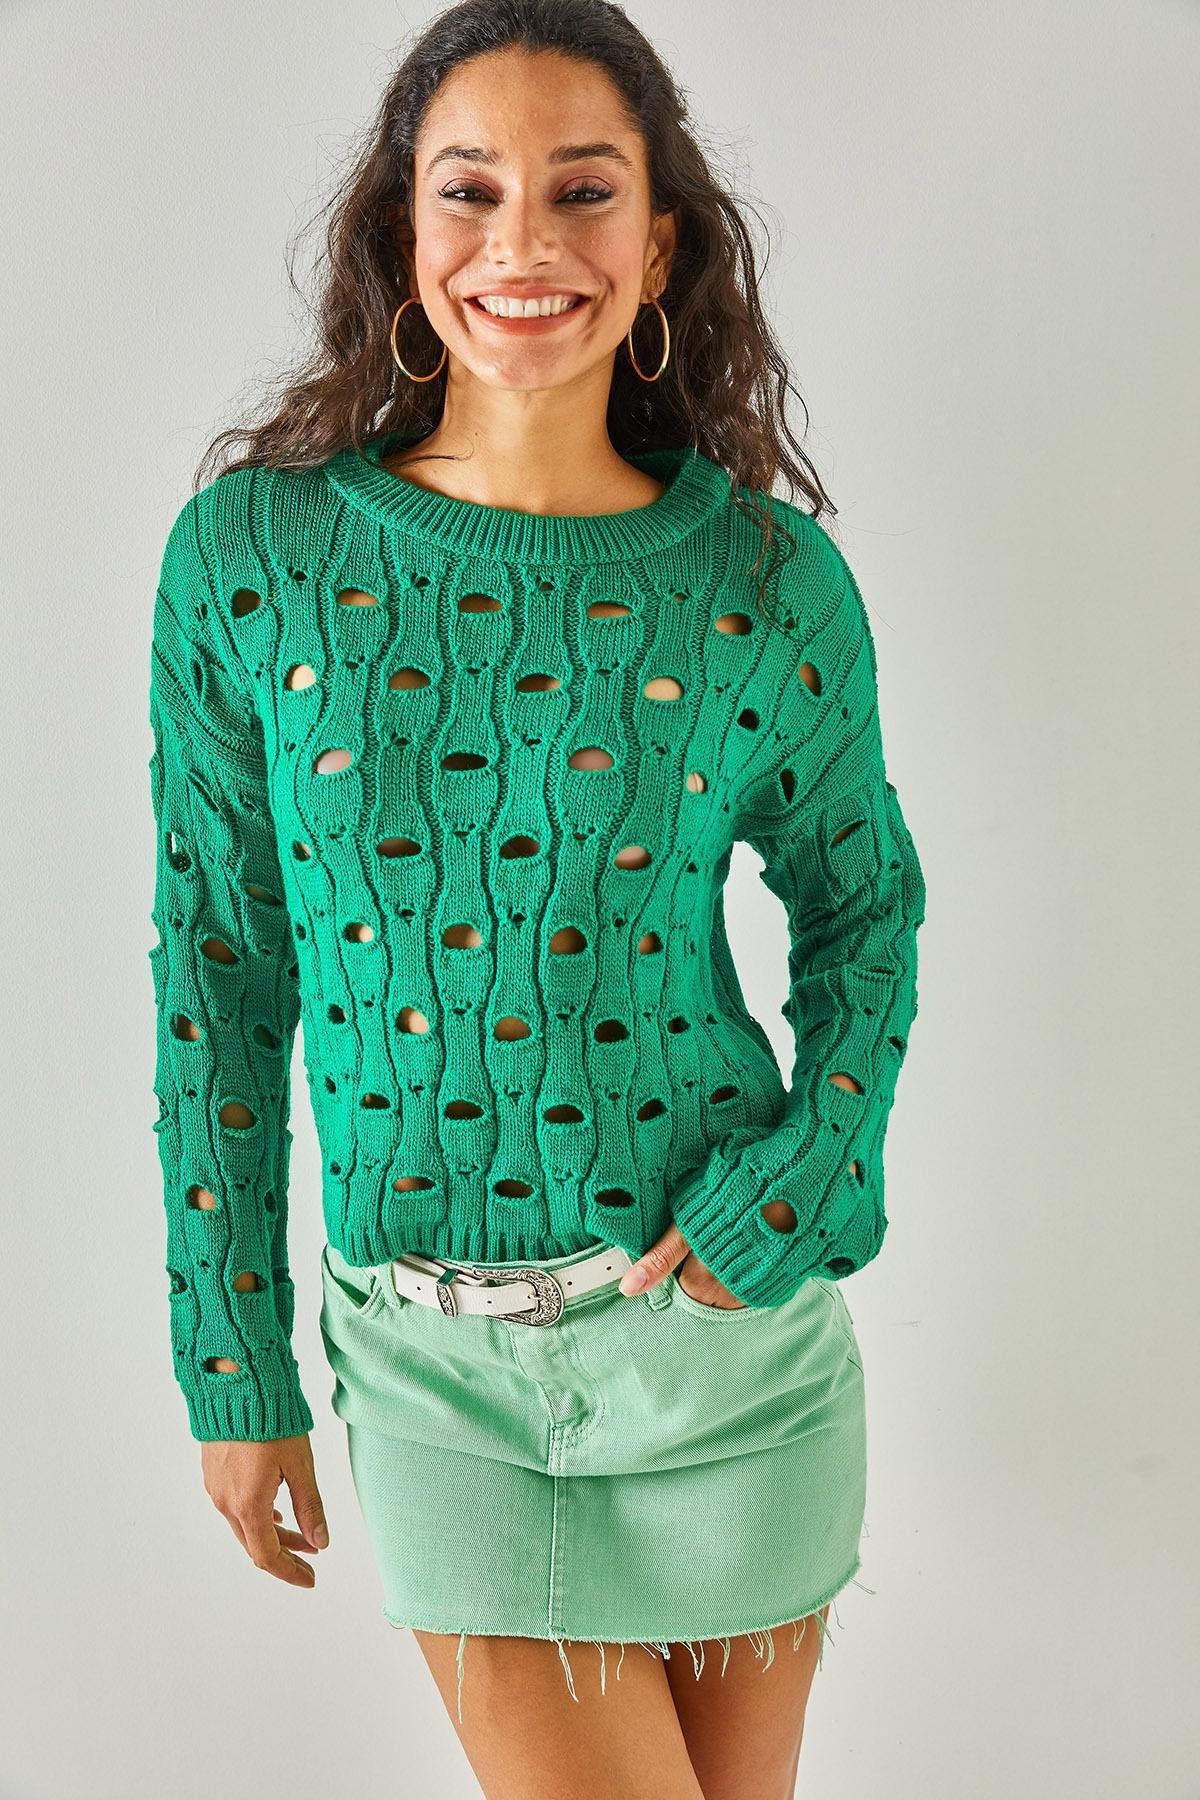 Olalook - Green Large Hole Knitted Sweater